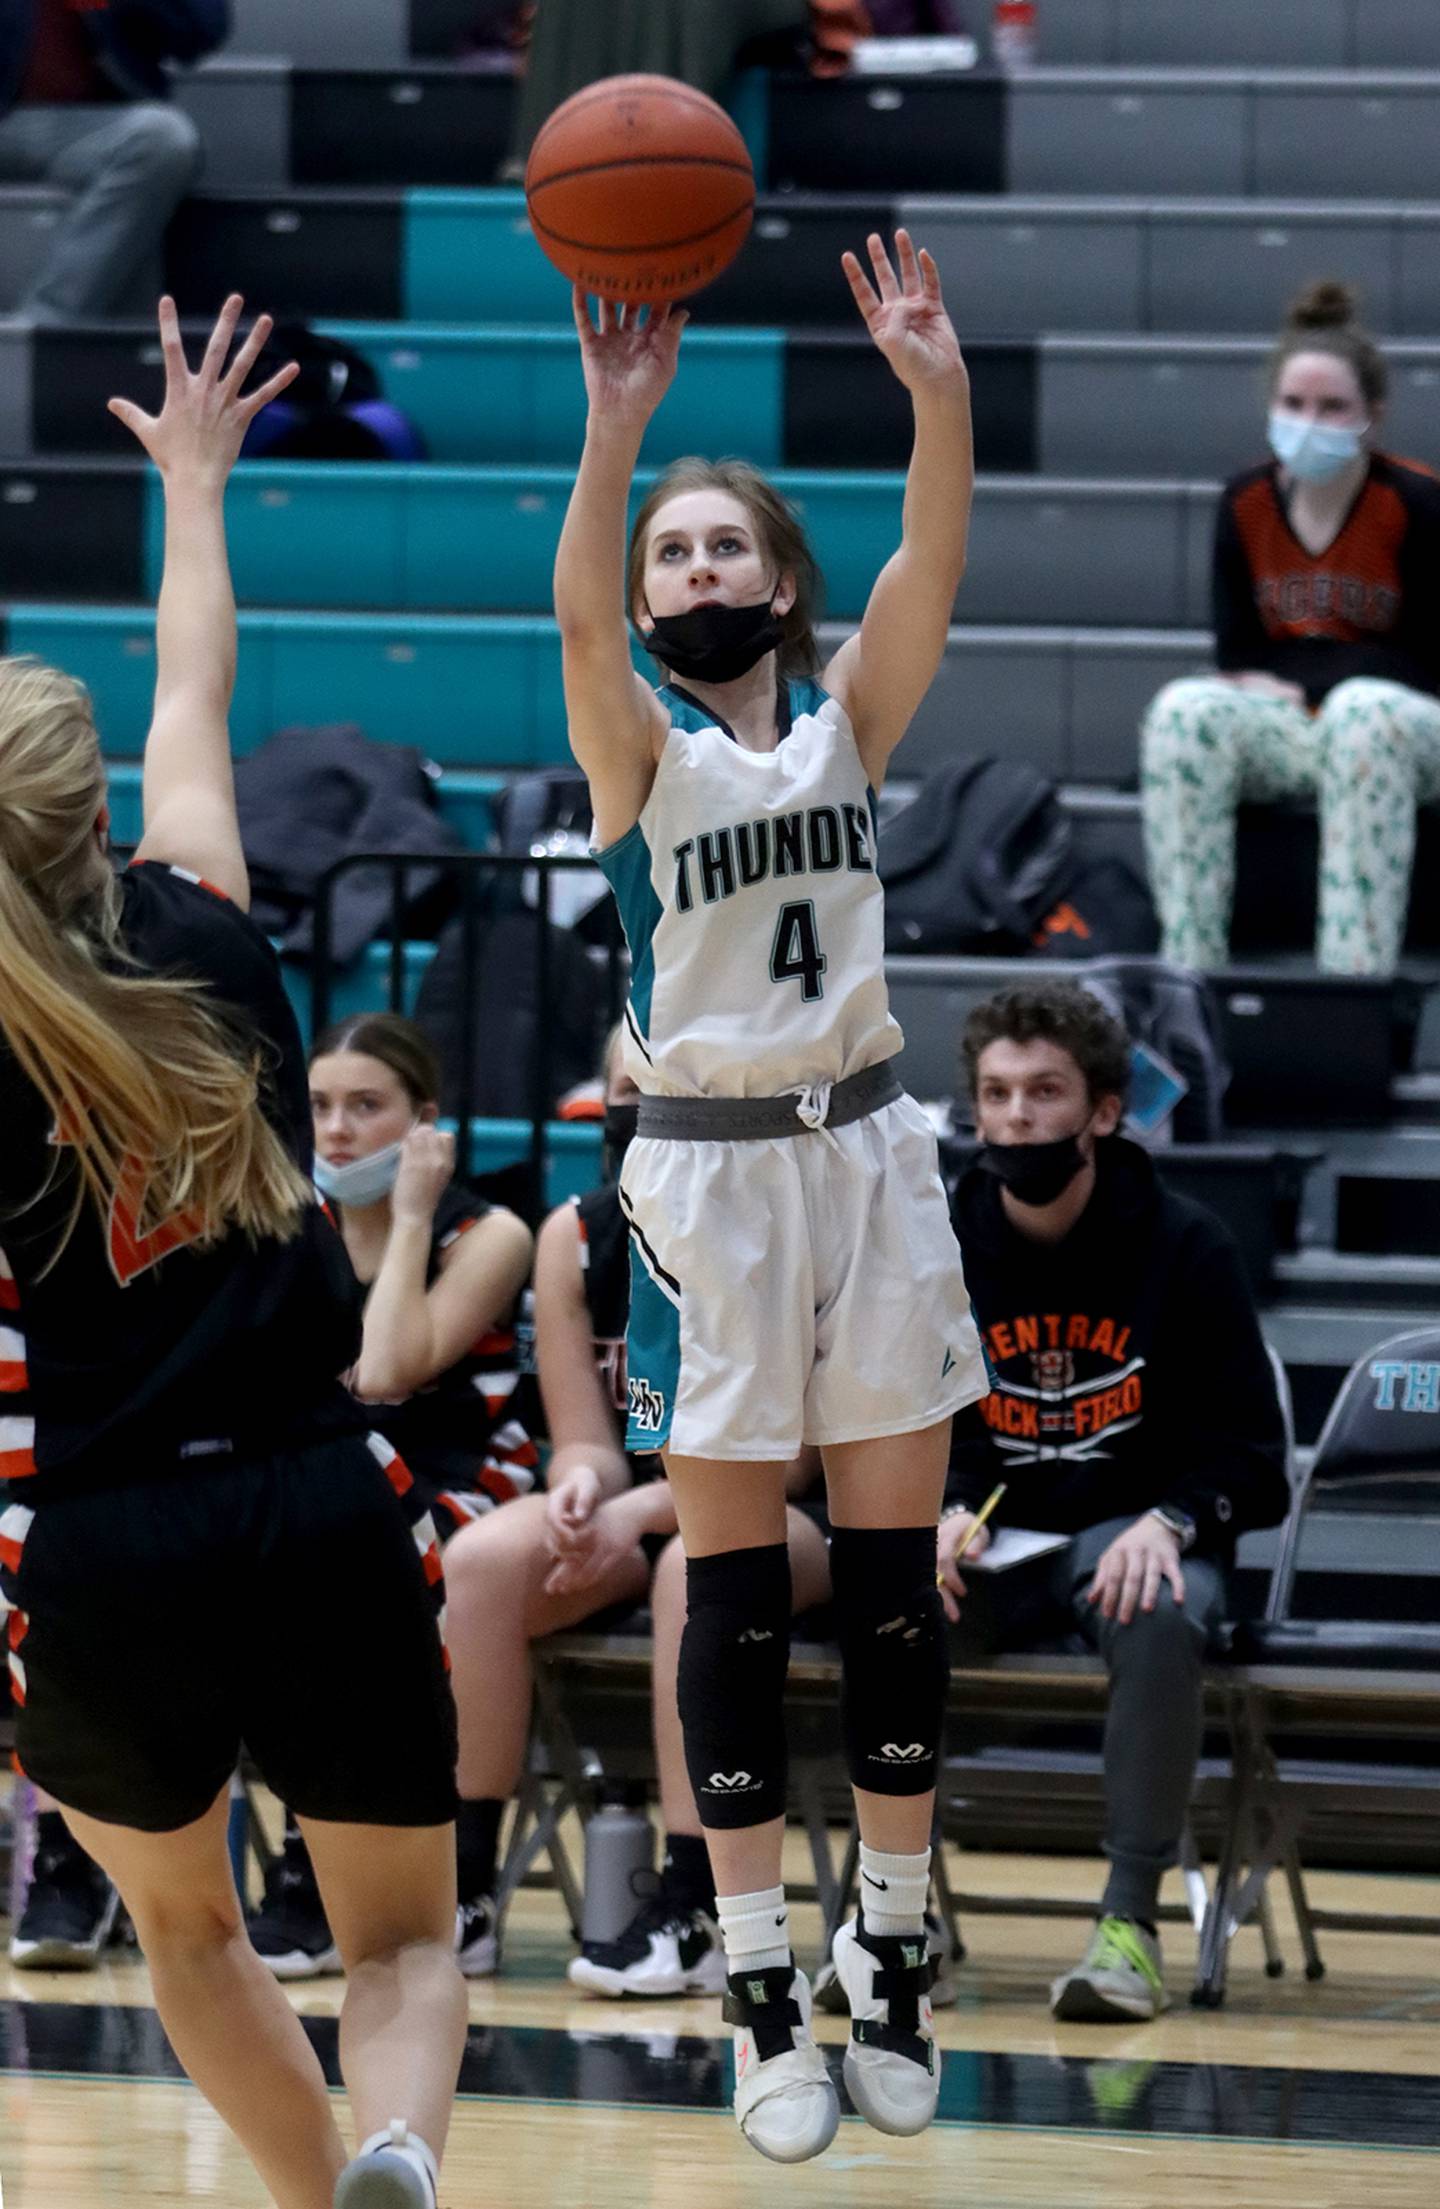 Woodstock North’s Lacey Schaffter takes an outside jumper against Crystal Lake Central during varsity girls basketball at Woodstock Monday night.